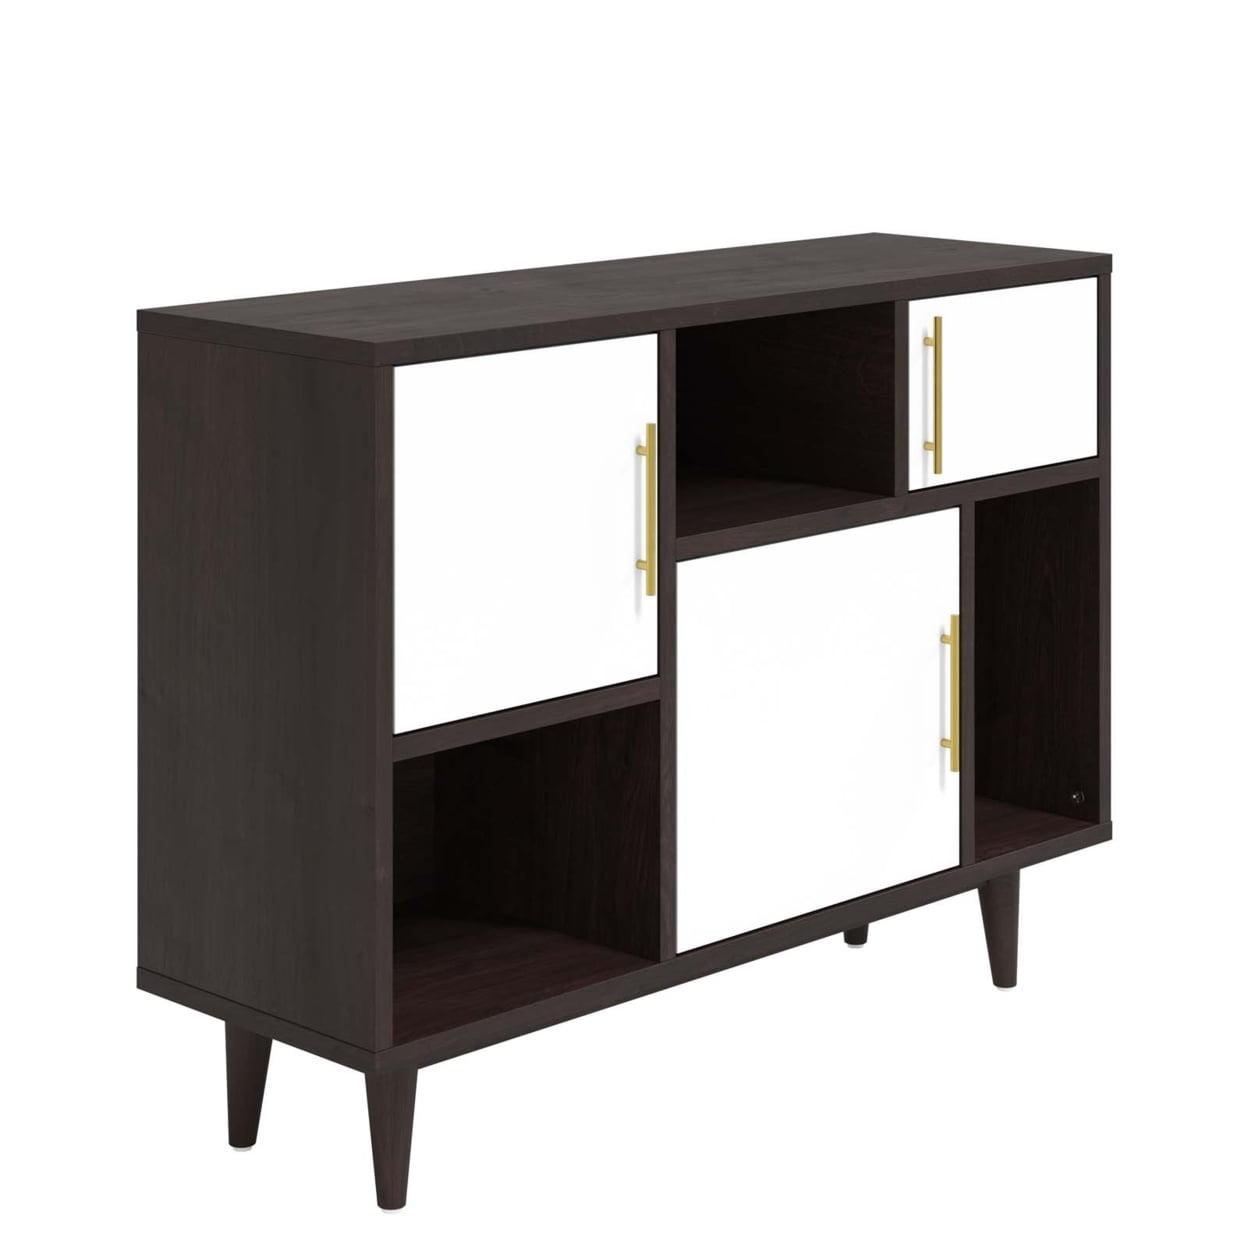 Daxton Mid-Century Cappuccino & White Display Stand with Gold Hardware